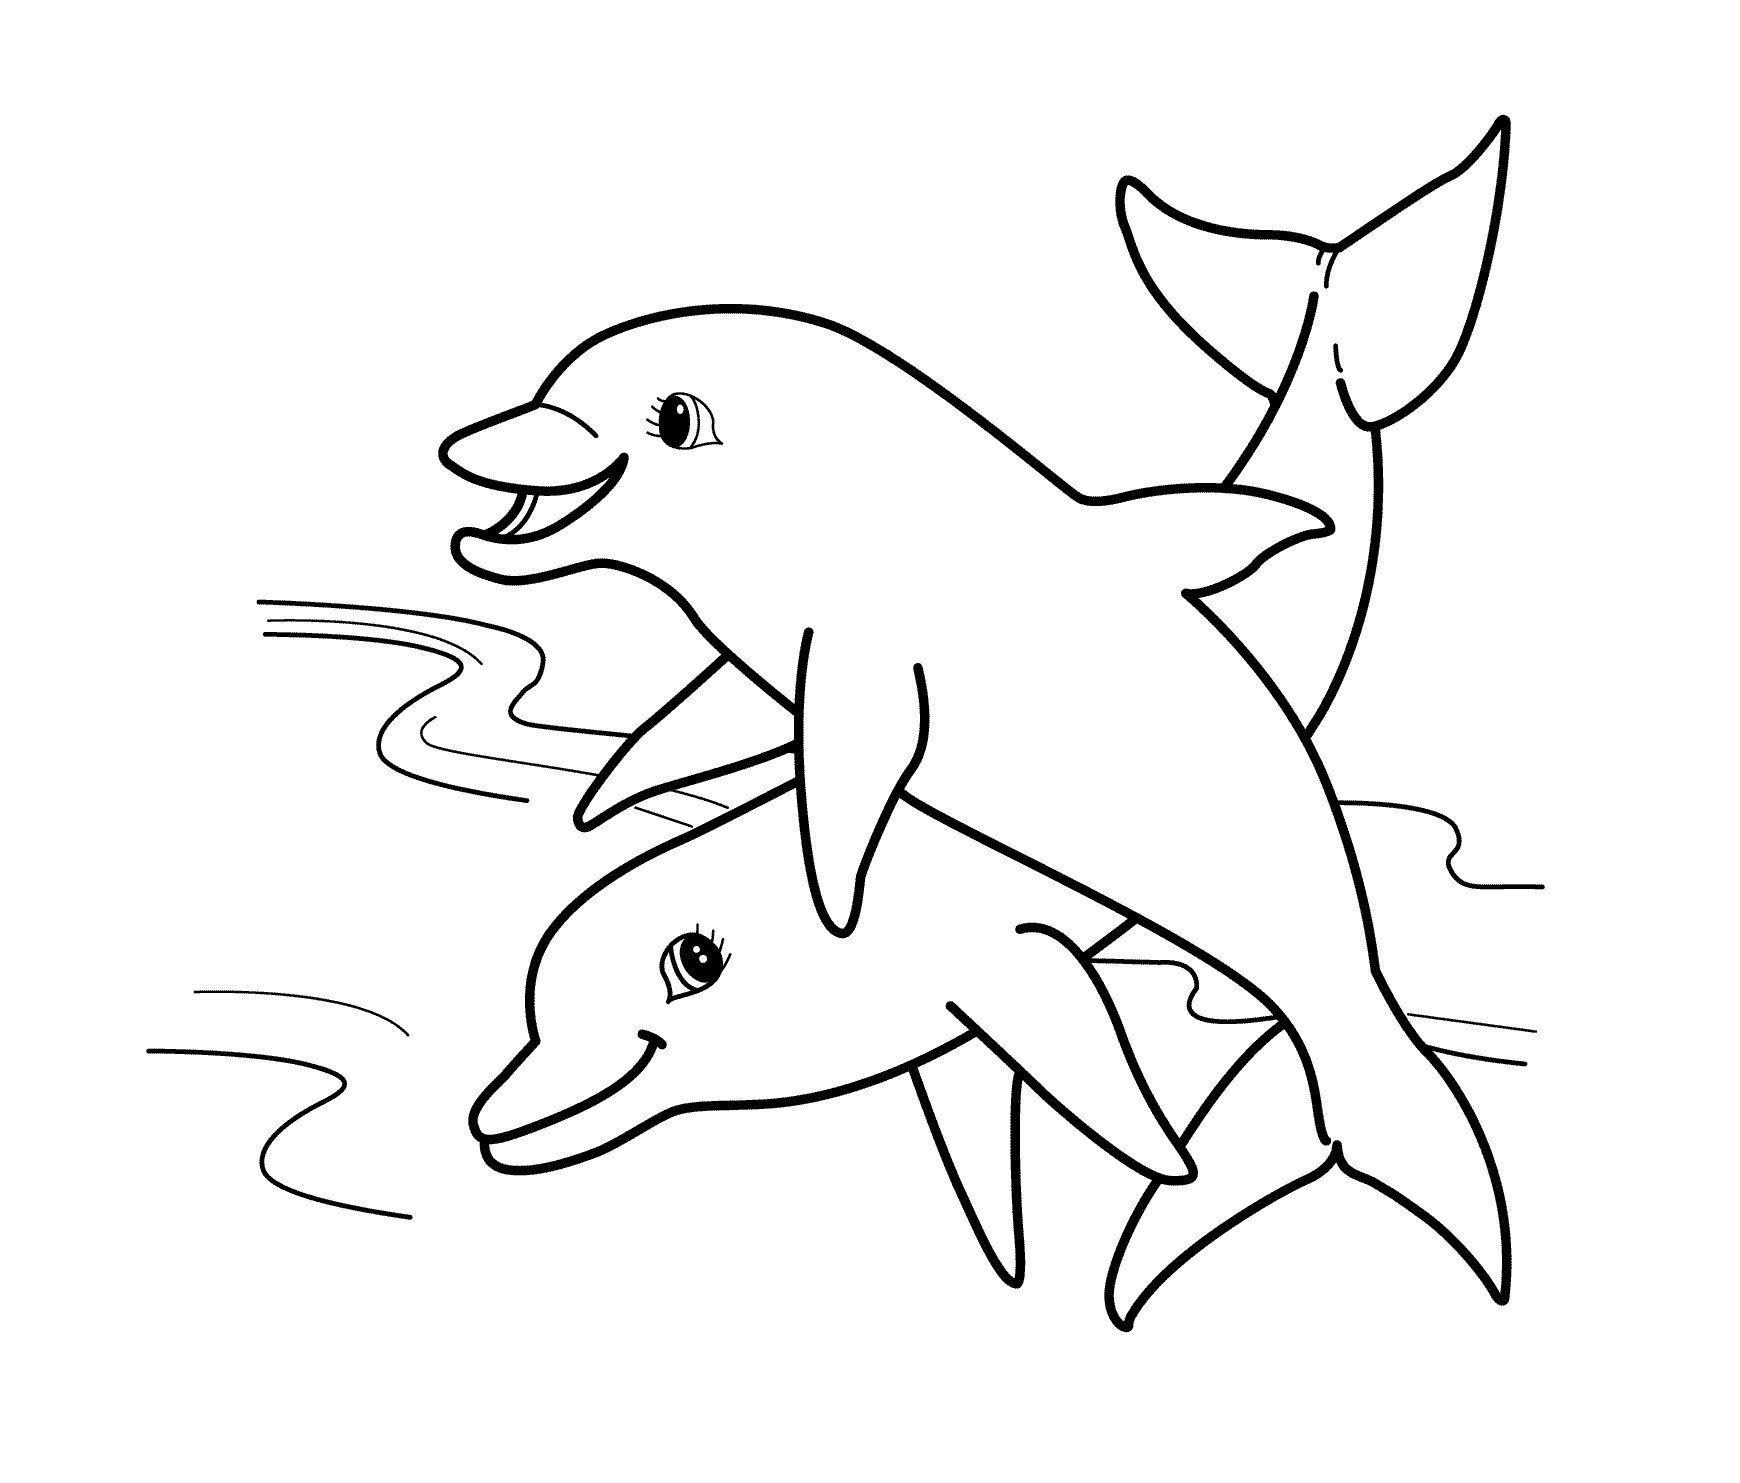 dolphins-coloring-page.gif